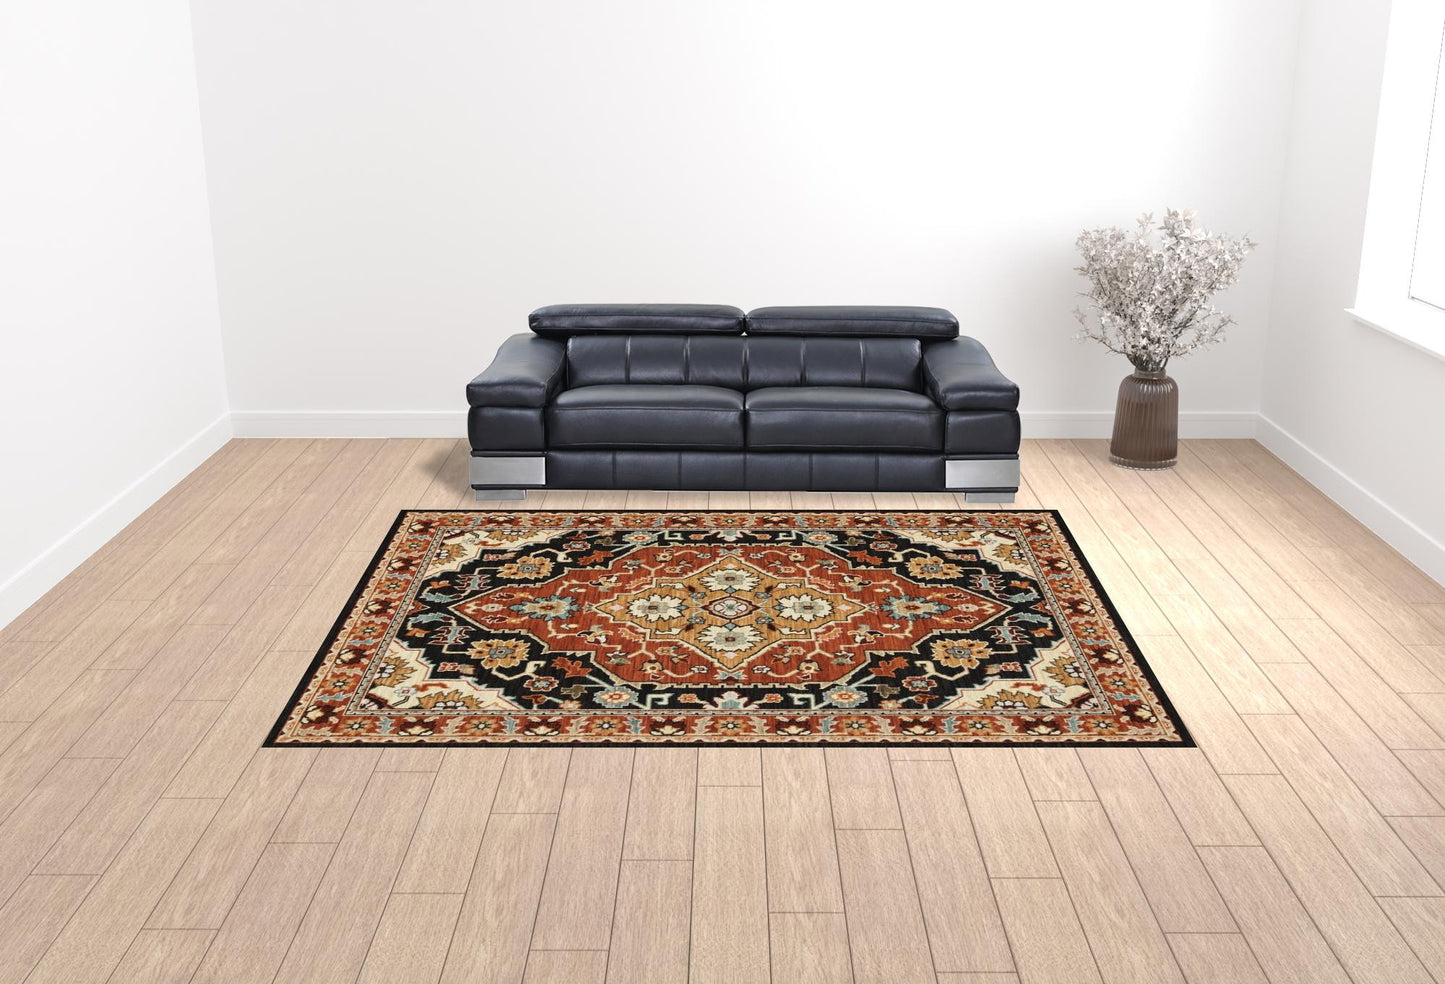 10' x 13' Red and Black Oriental Power Loom Area Rug